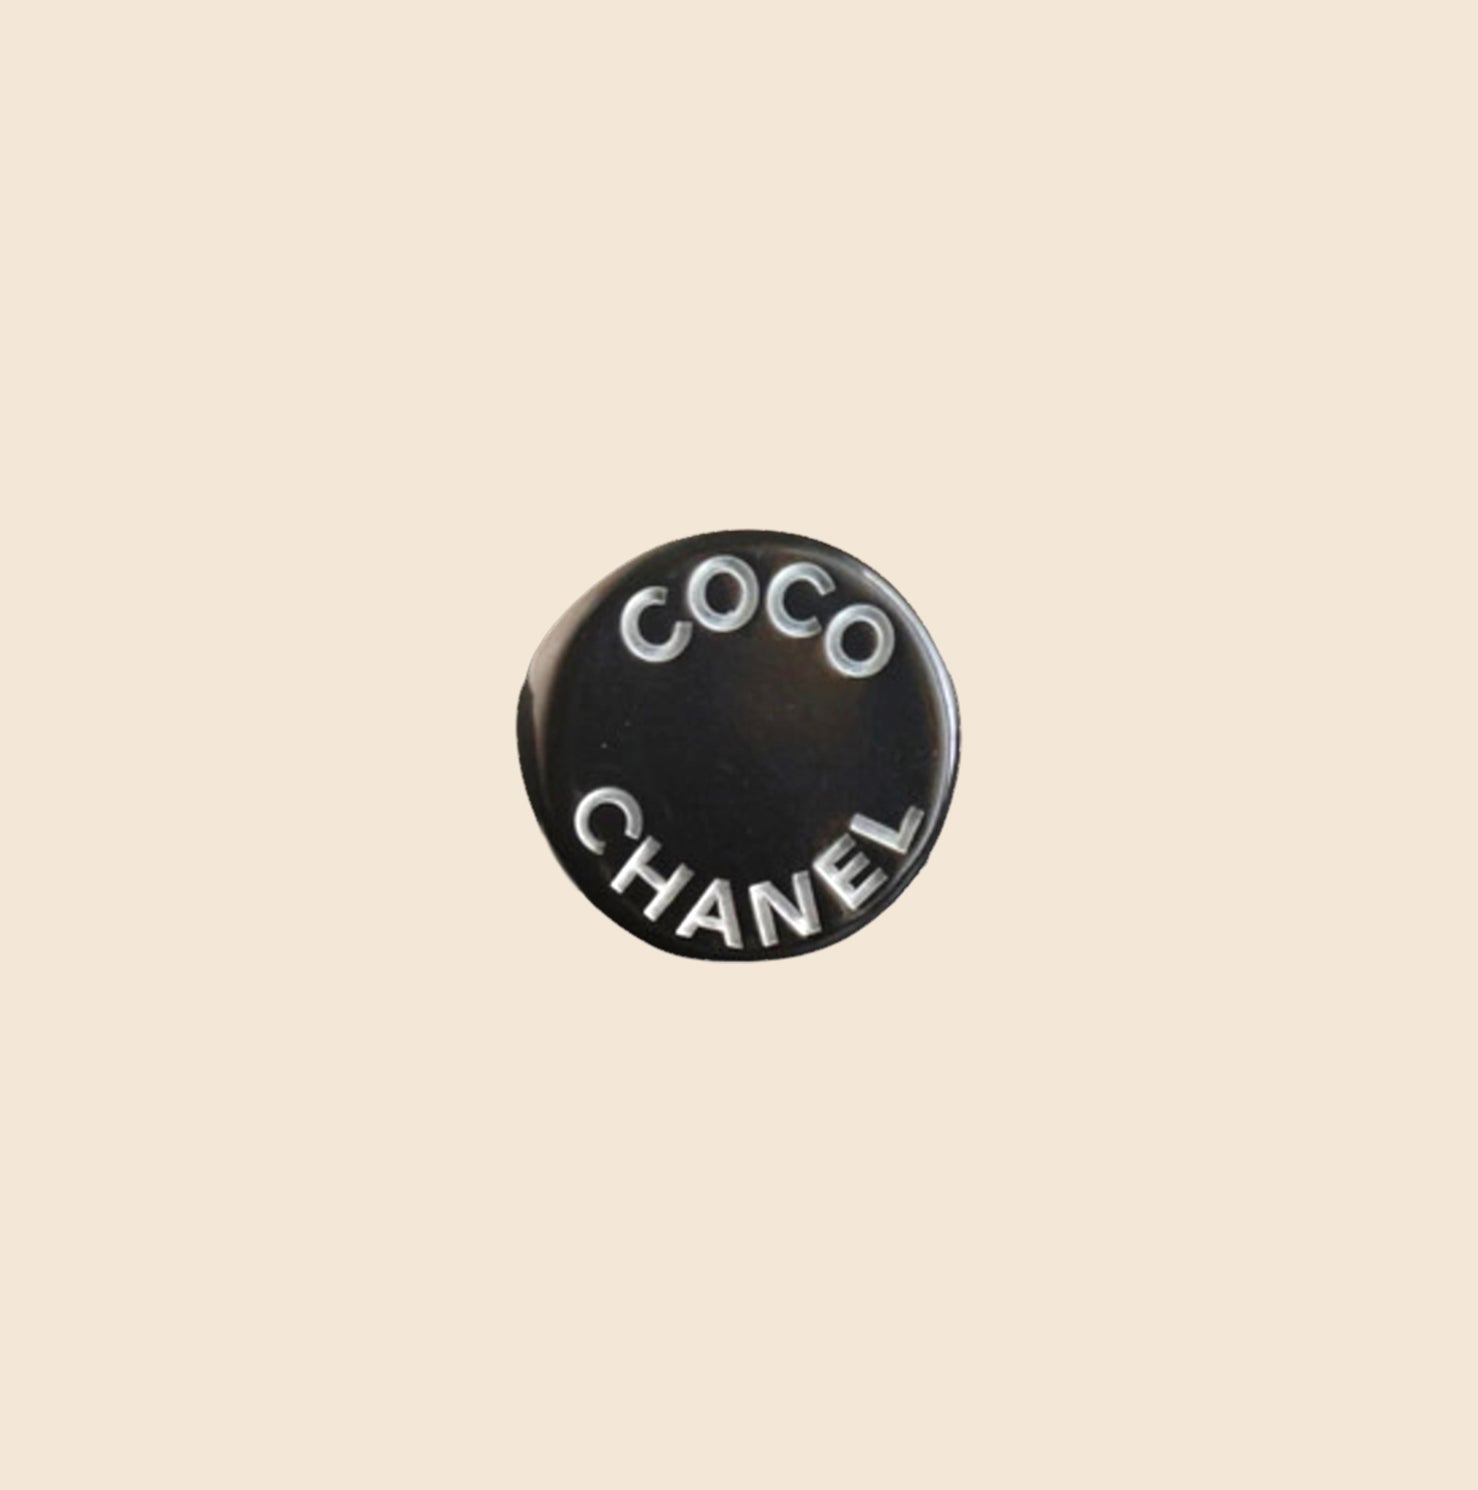 CHANEL COCO CHANEL RESIN RING